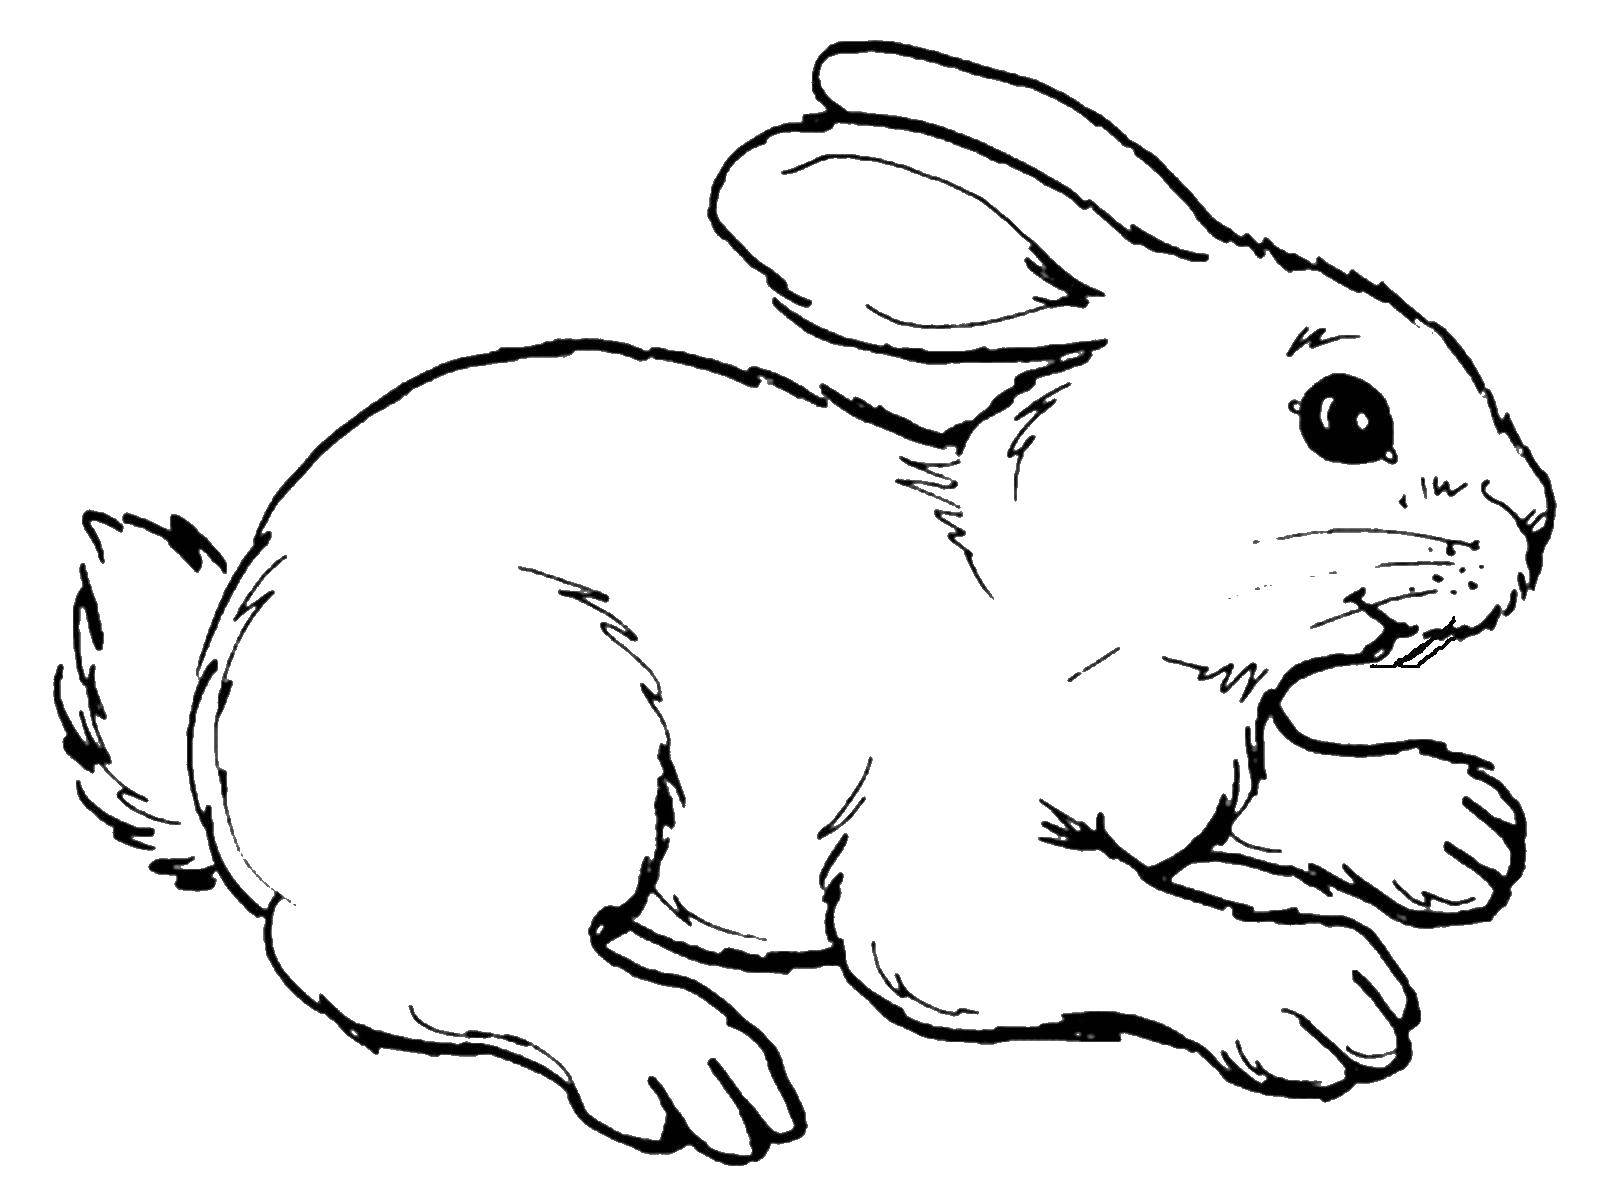 Coloring Hare. Category Animals. Tags:  hare, rabbit.